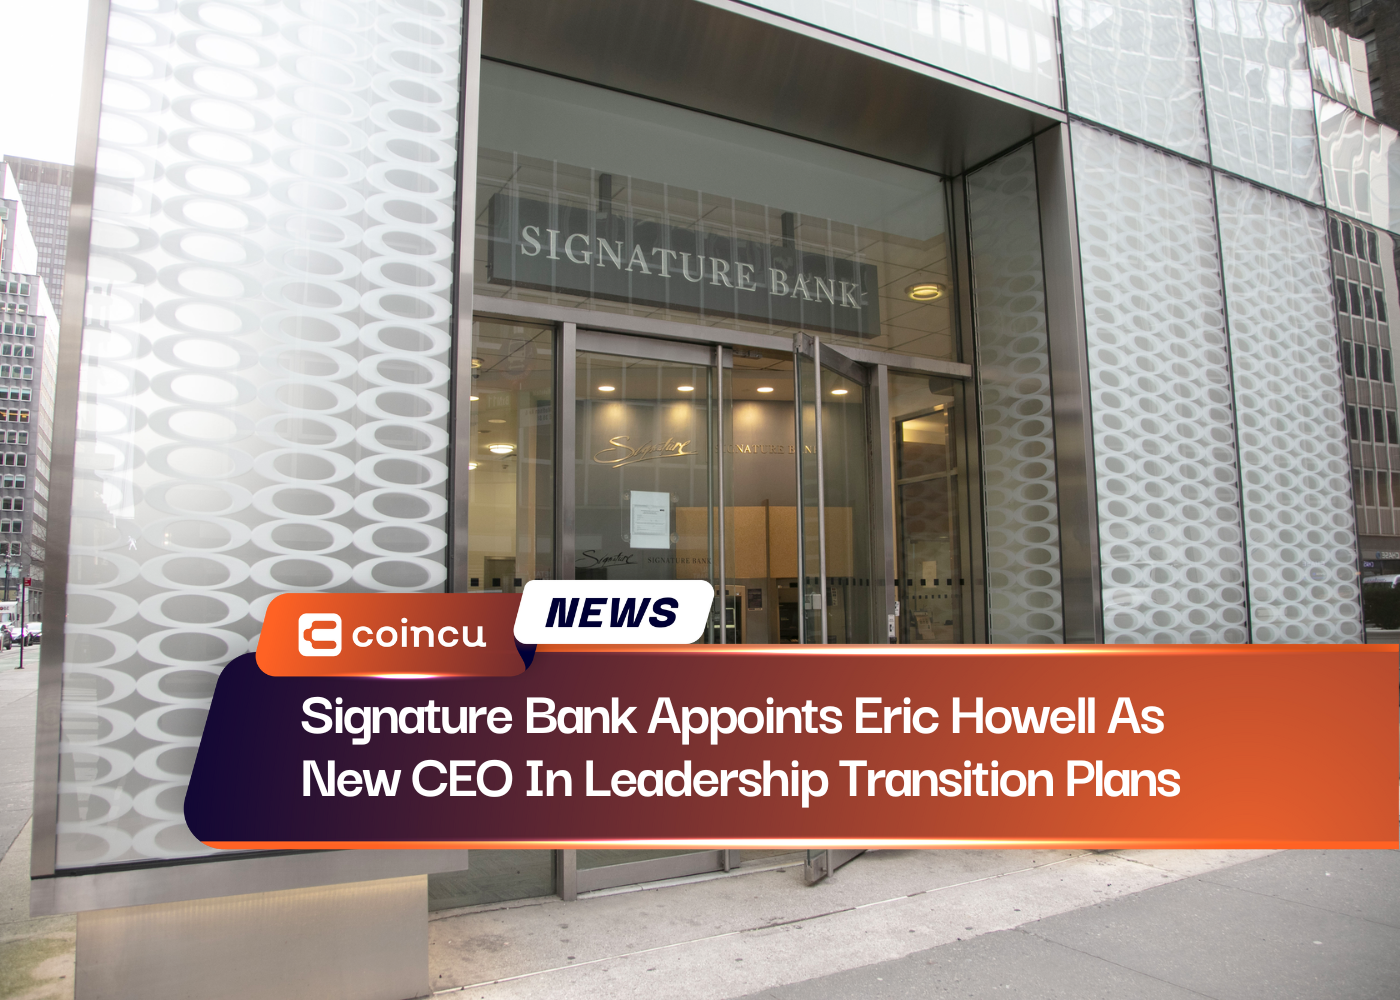 Signature Bank Appoints Eric Howell As New CEO In Leadership Transition Plans